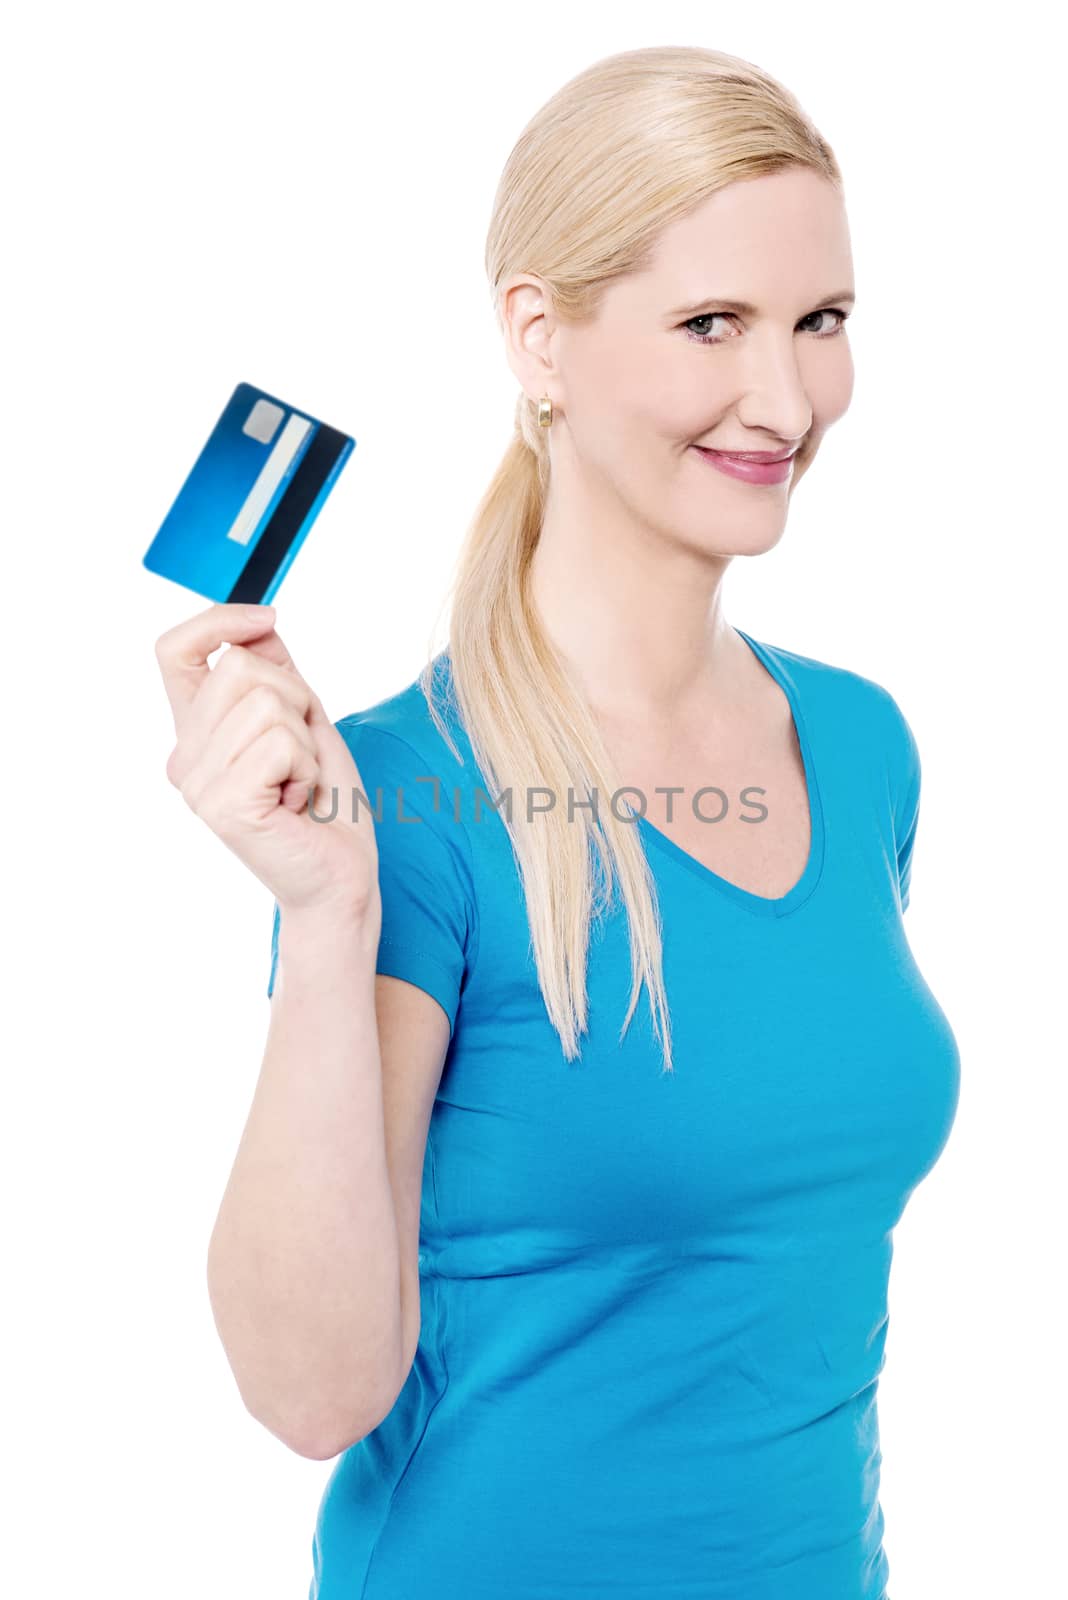 Credit card, my shopping partner! by stockyimages